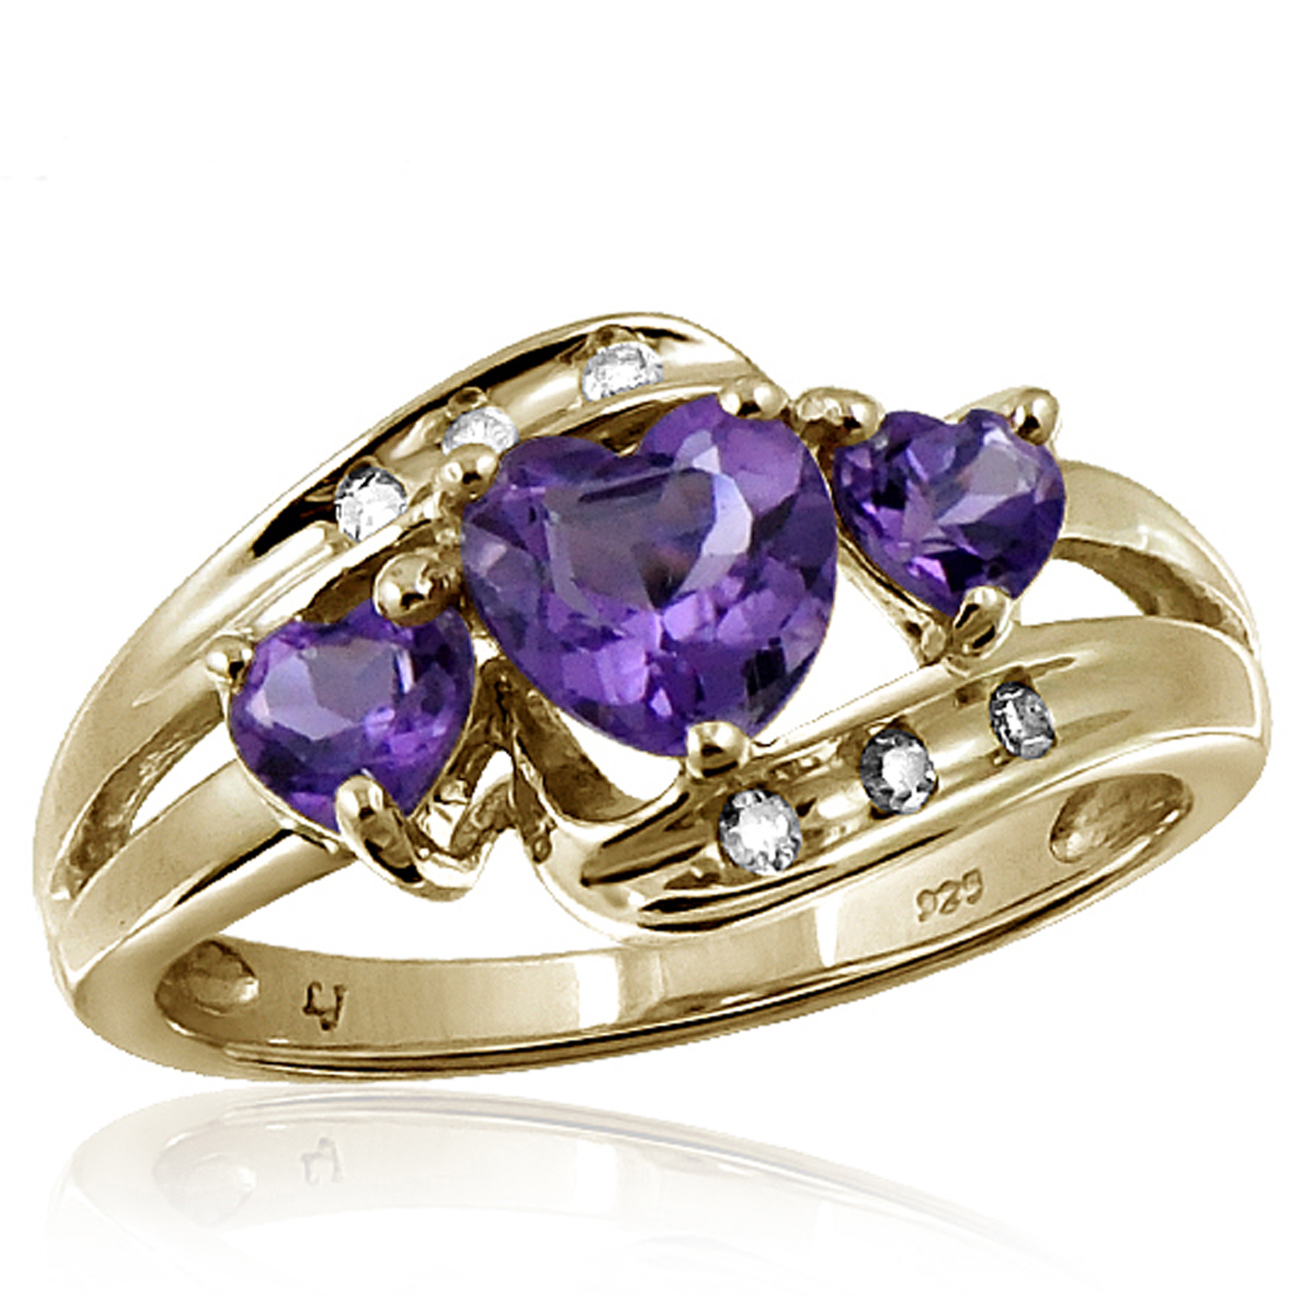 1.10 cttw Genuine Amethyst Gemstone & Accent White Diamond Ring In Gold Over Silver